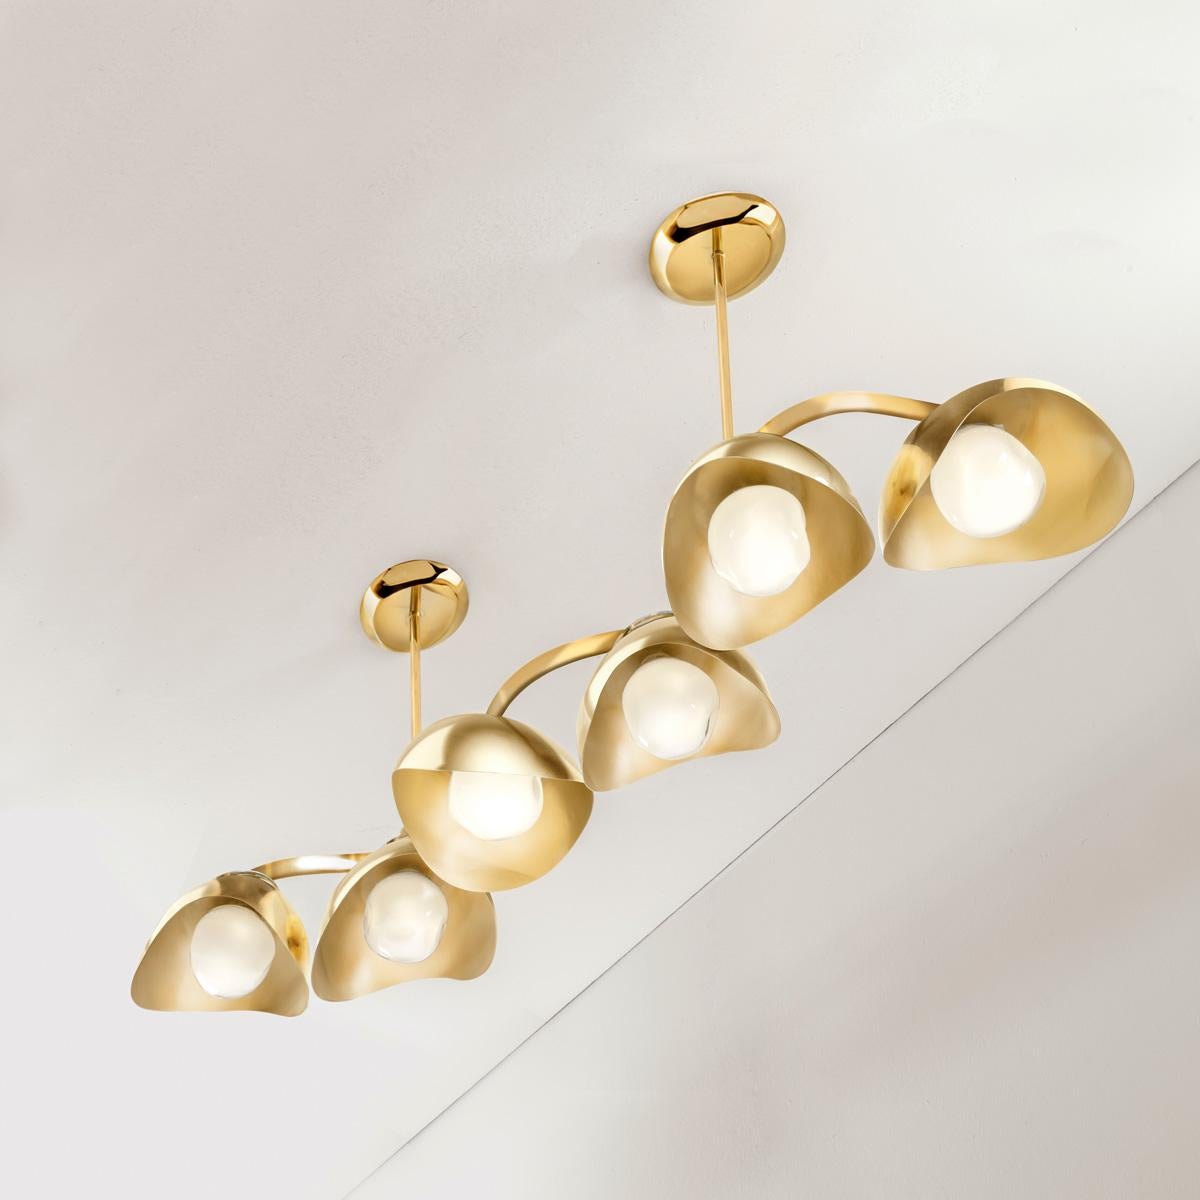 Modern Serpente Ceiling Light by Gaspare Asaro- Polished Nickel and Satin Brass Finish For Sale